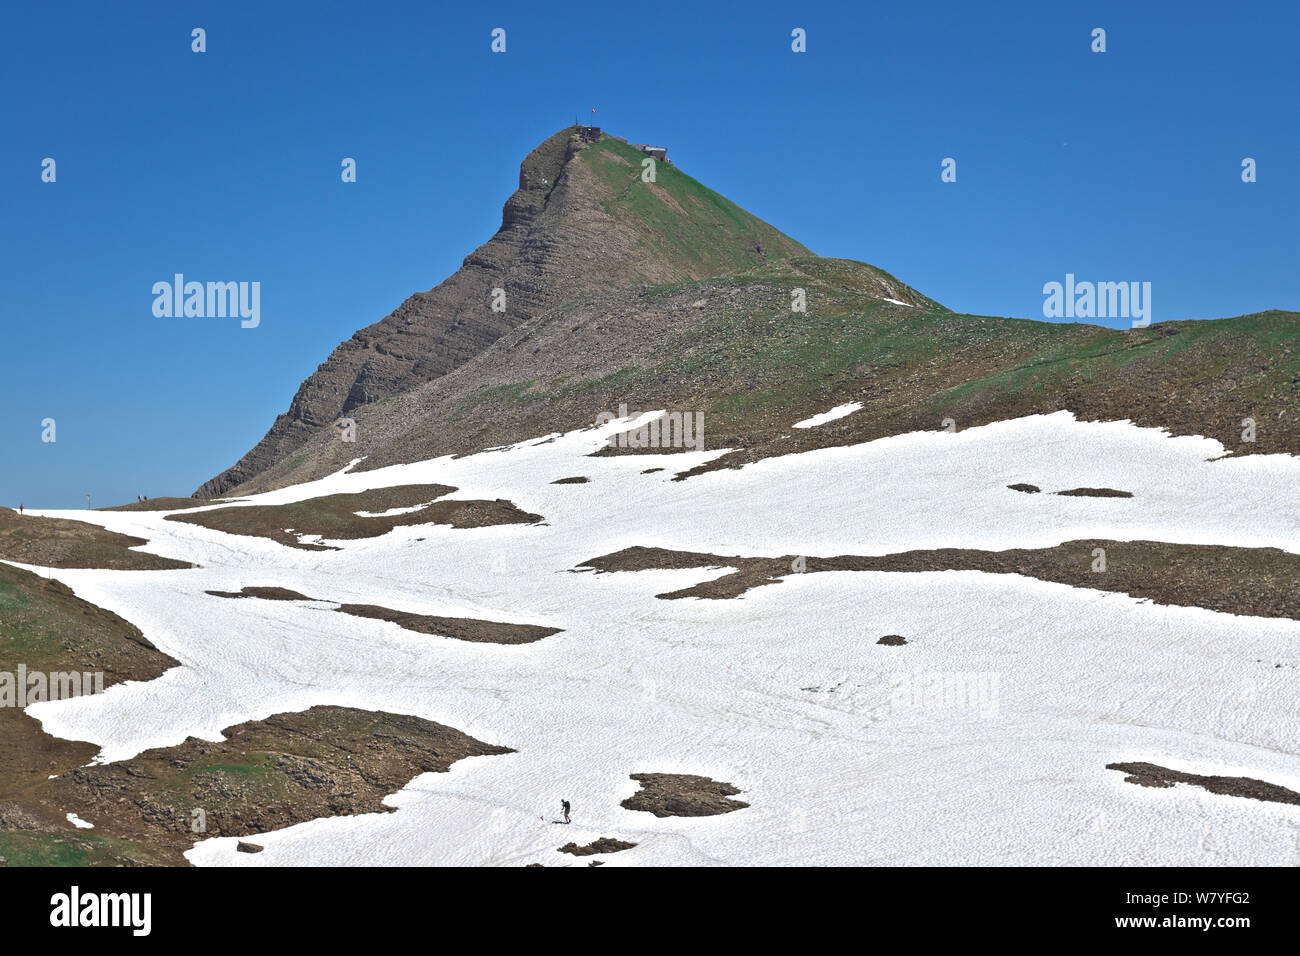 scenic view of swiss alpine mountain faulhorn and snow fields with small distant hiker. Alpine mountain landscape in jungfrau region. Stock Photo